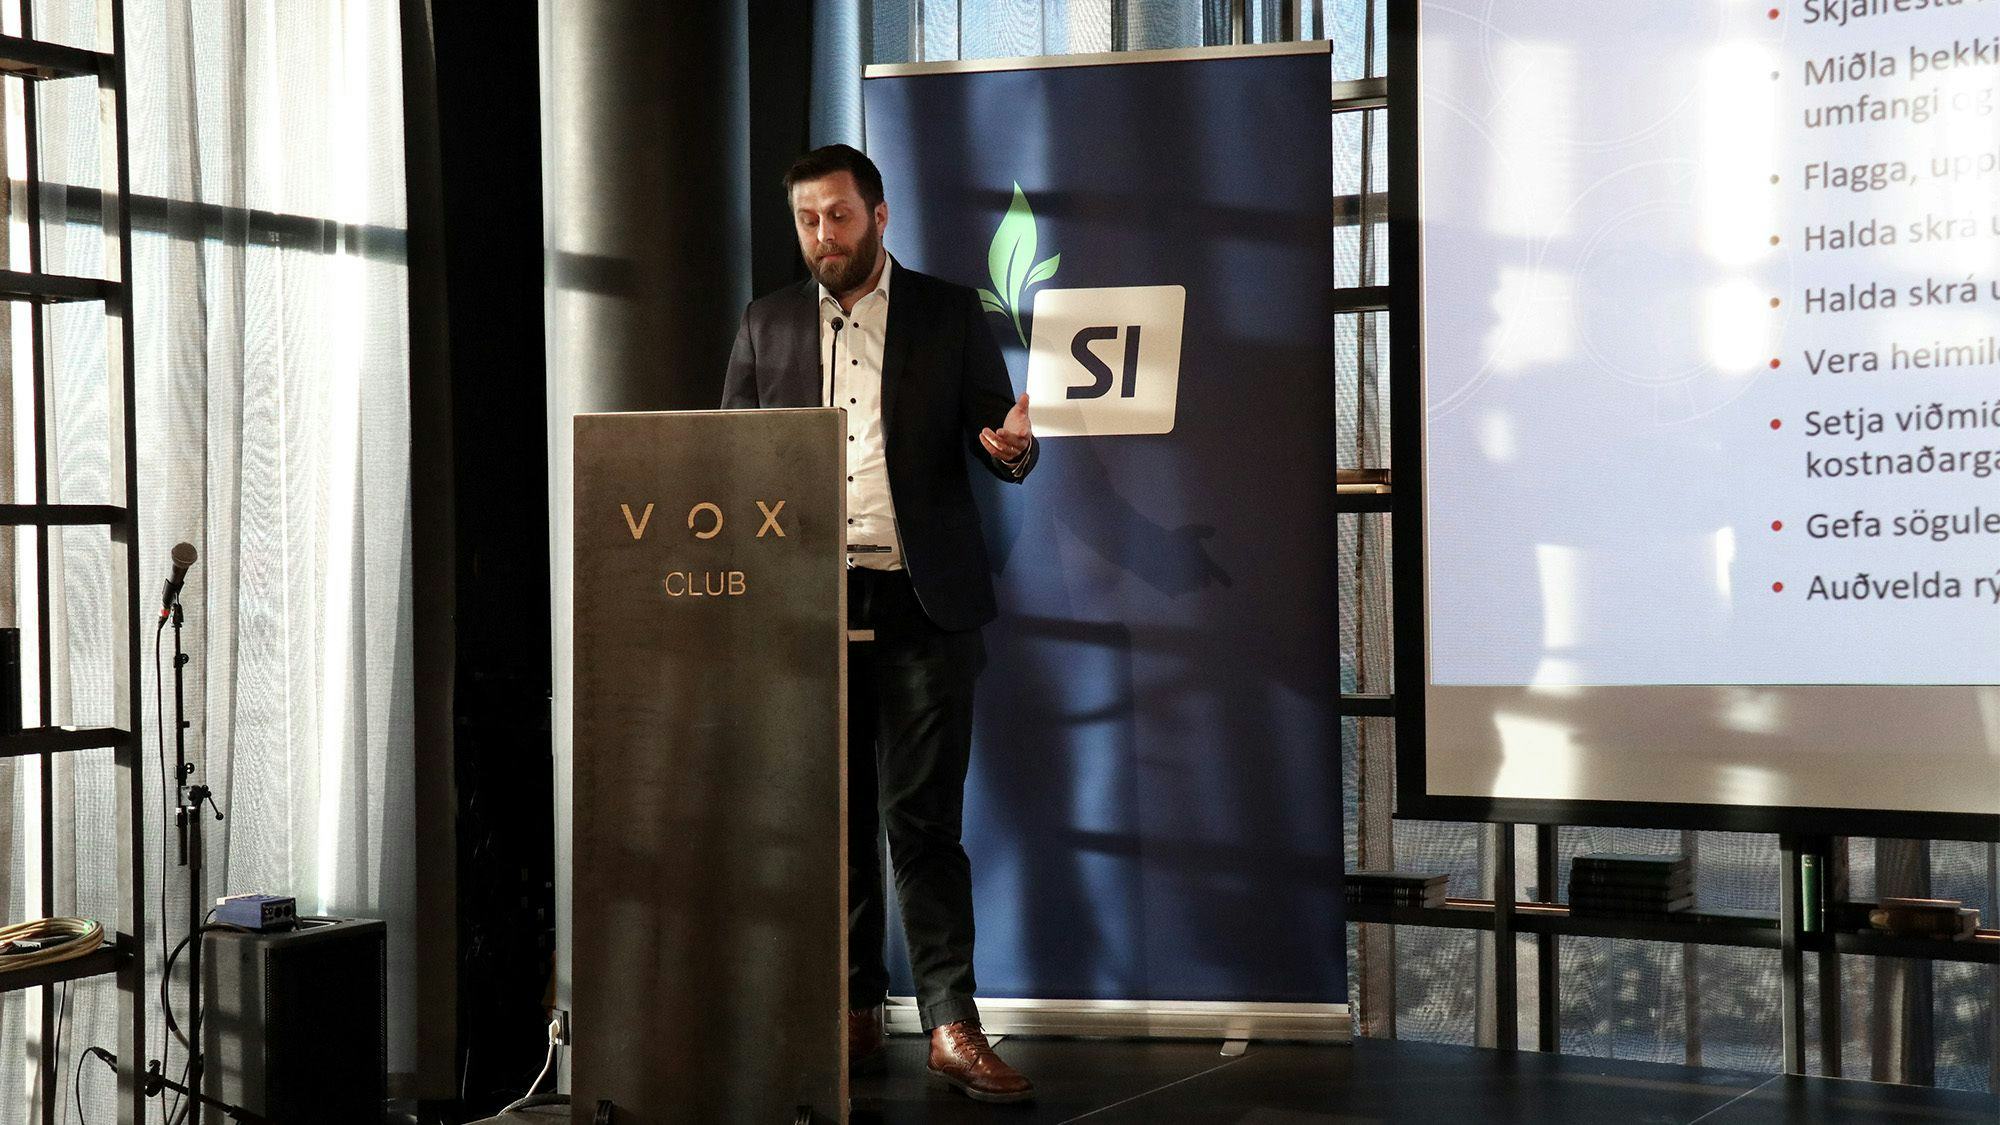 A man standing behind a lectern with "VOX CLUB" on the front, 